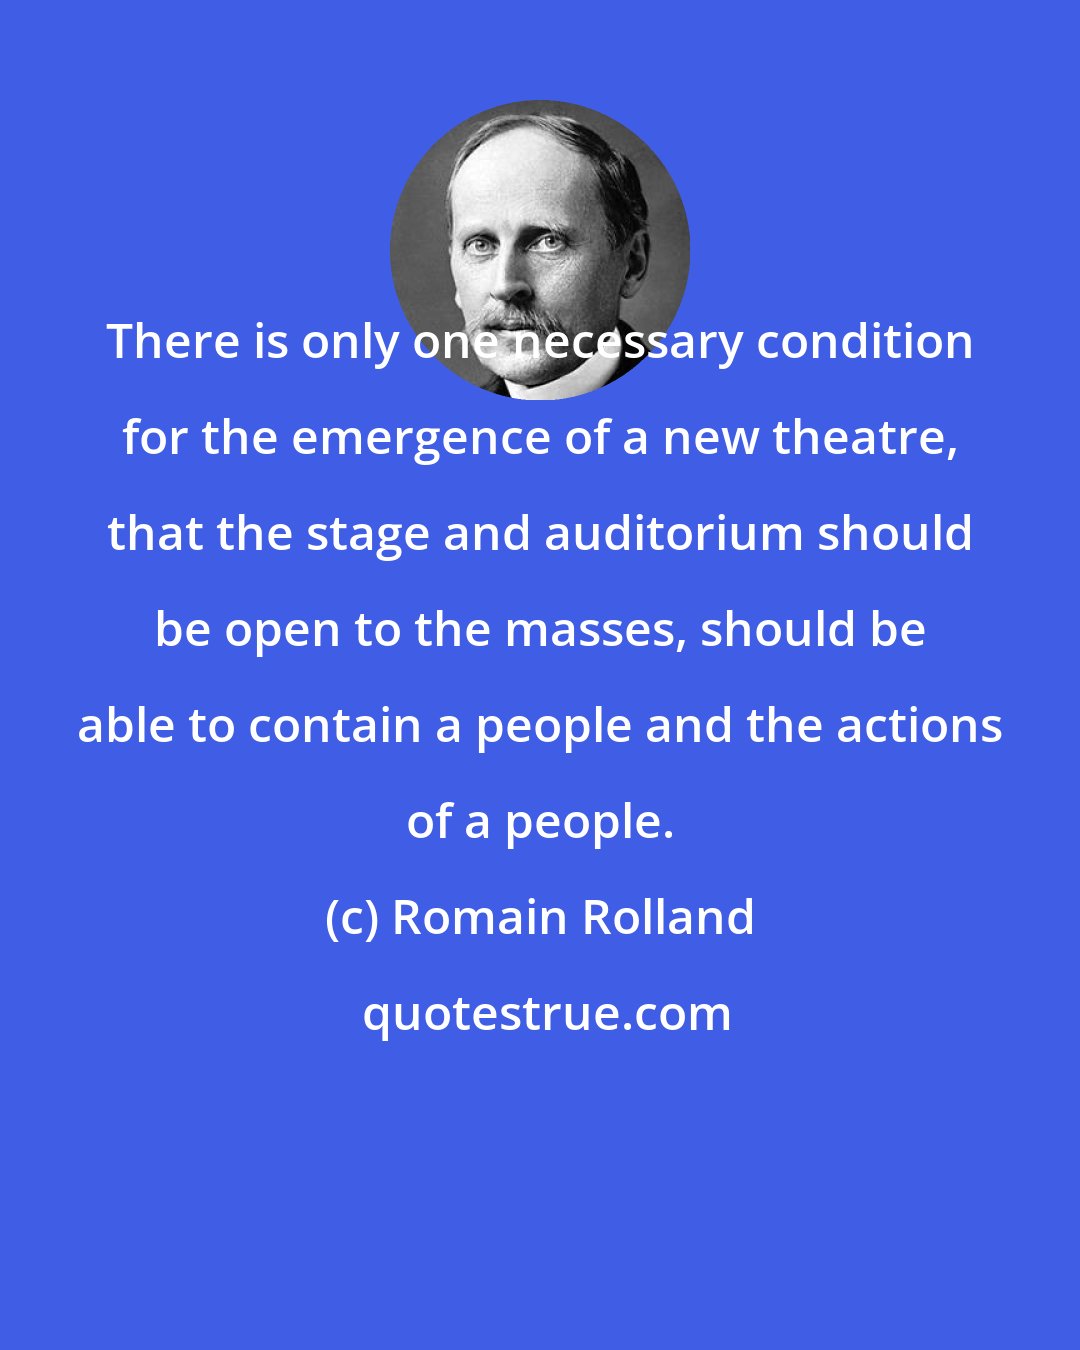 Romain Rolland: There is only one necessary condition for the emergence of a new theatre, that the stage and auditorium should be open to the masses, should be able to contain a people and the actions of a people.